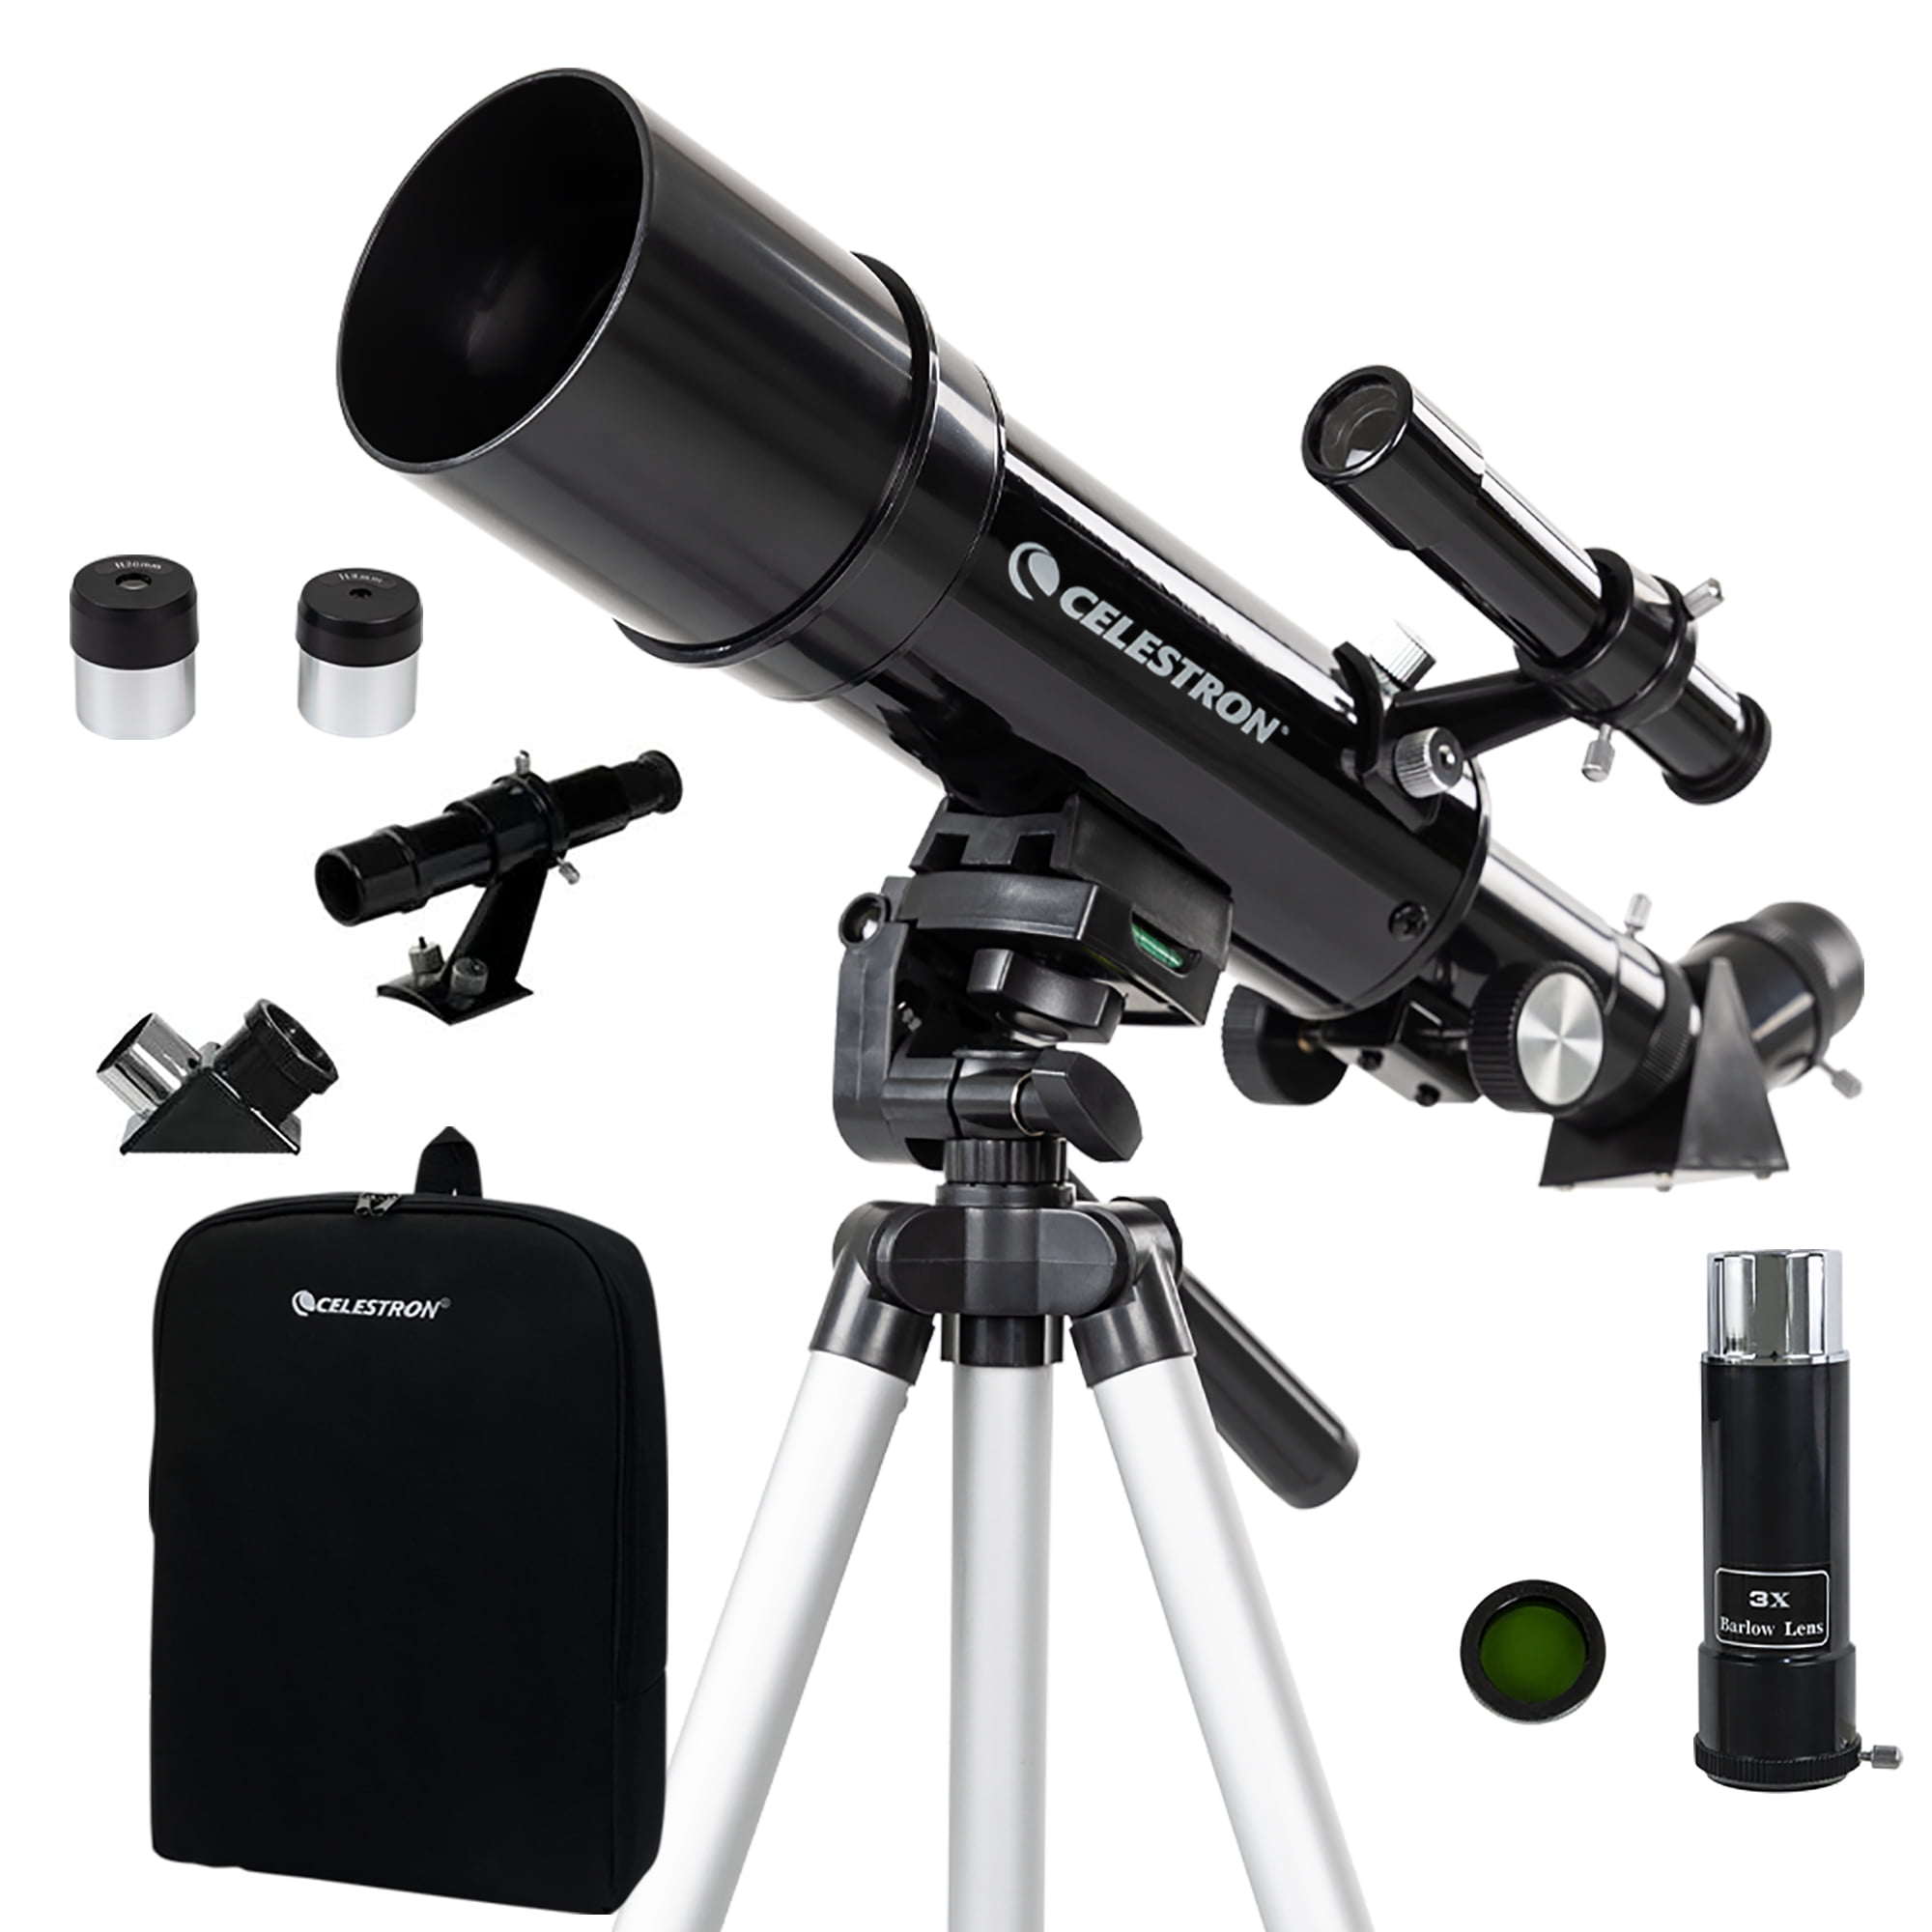 Does Walmart Sell Telescopes In Store